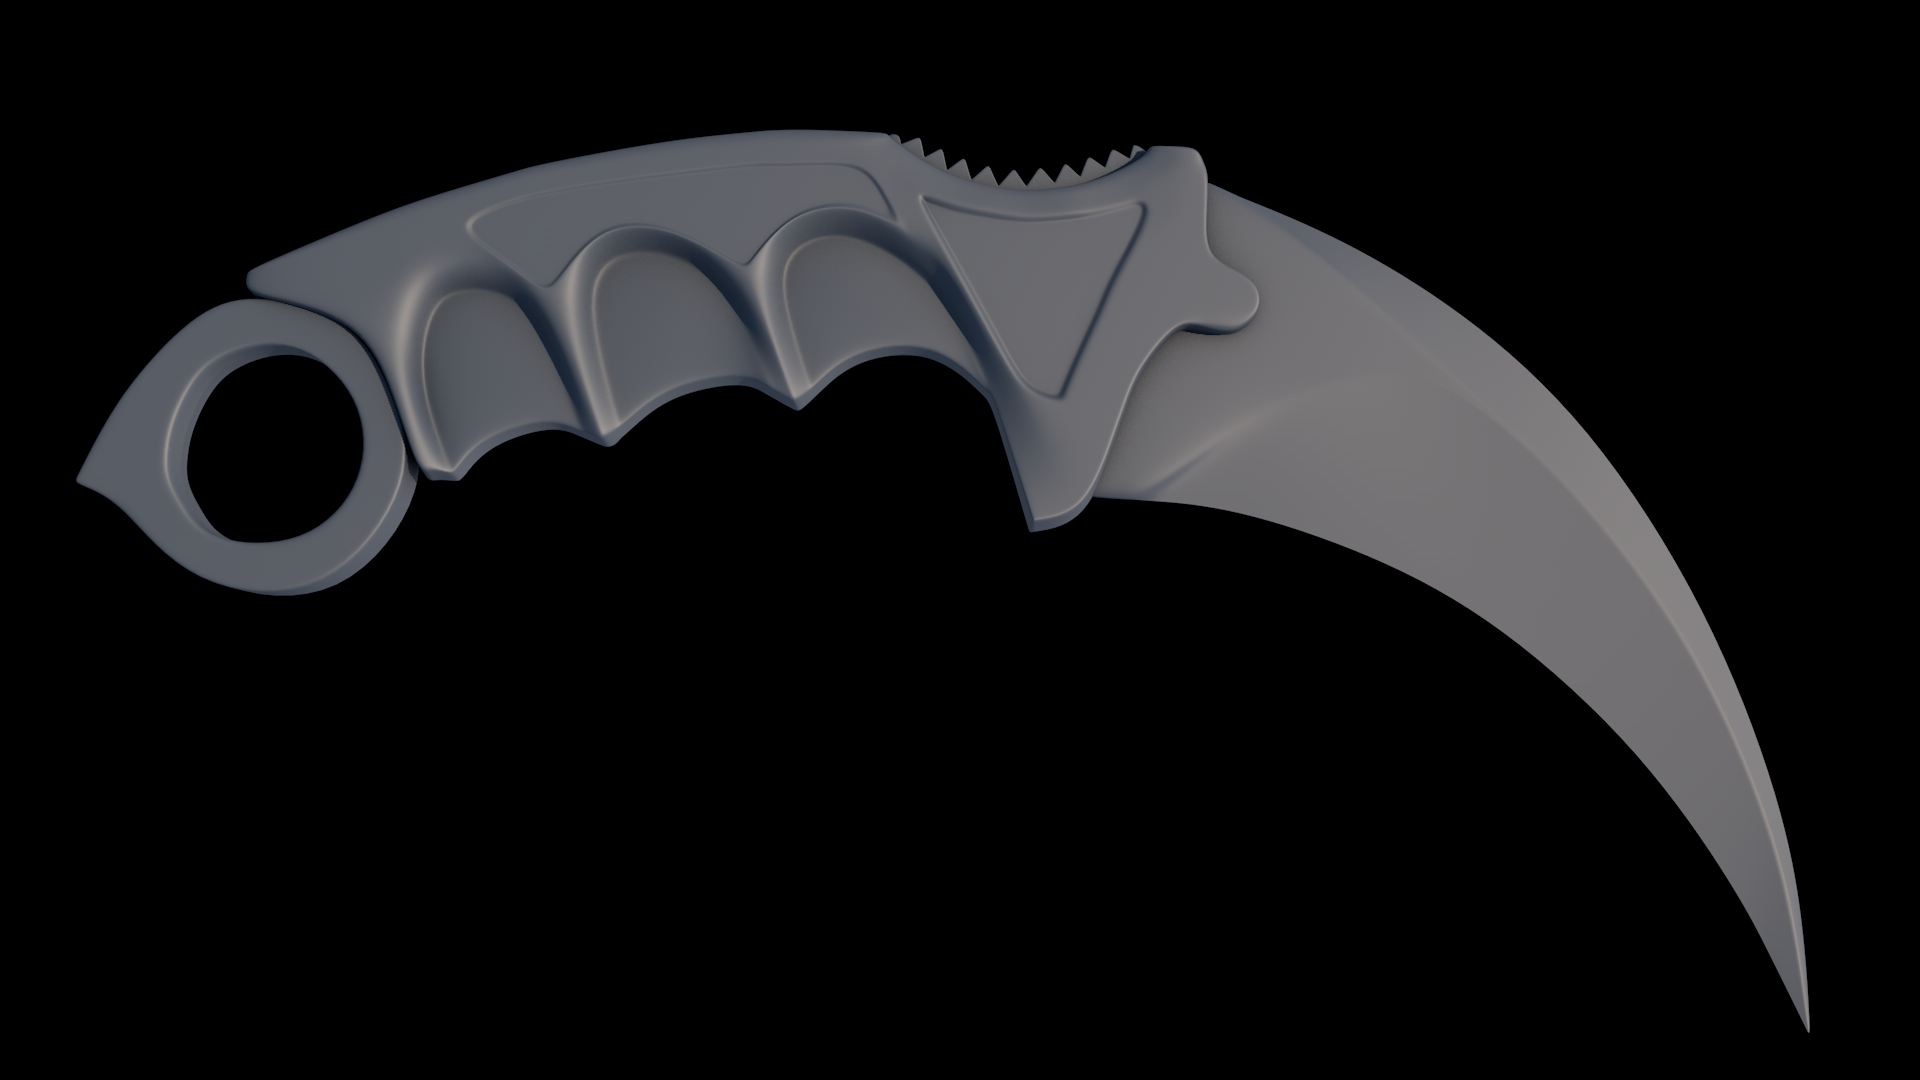 how-to-make-valorant-2-0-prime-karambit-knife-out-of-cardboard-level-2